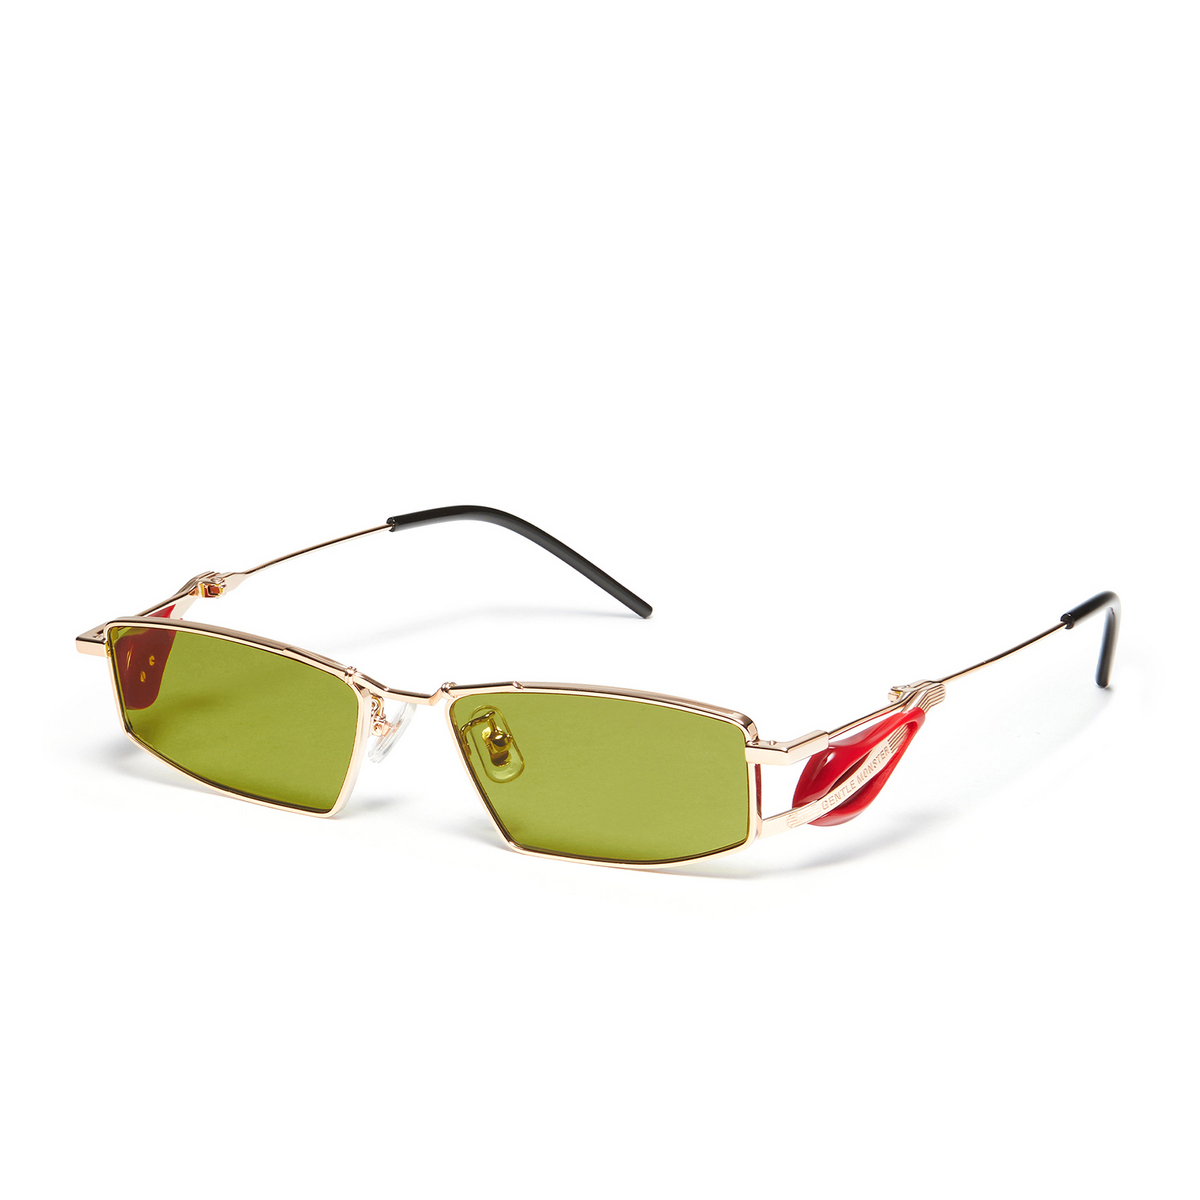 Gentle Monster® Rectangle Sunglasses: Seydoux color Gold 032 - three-quarters view.